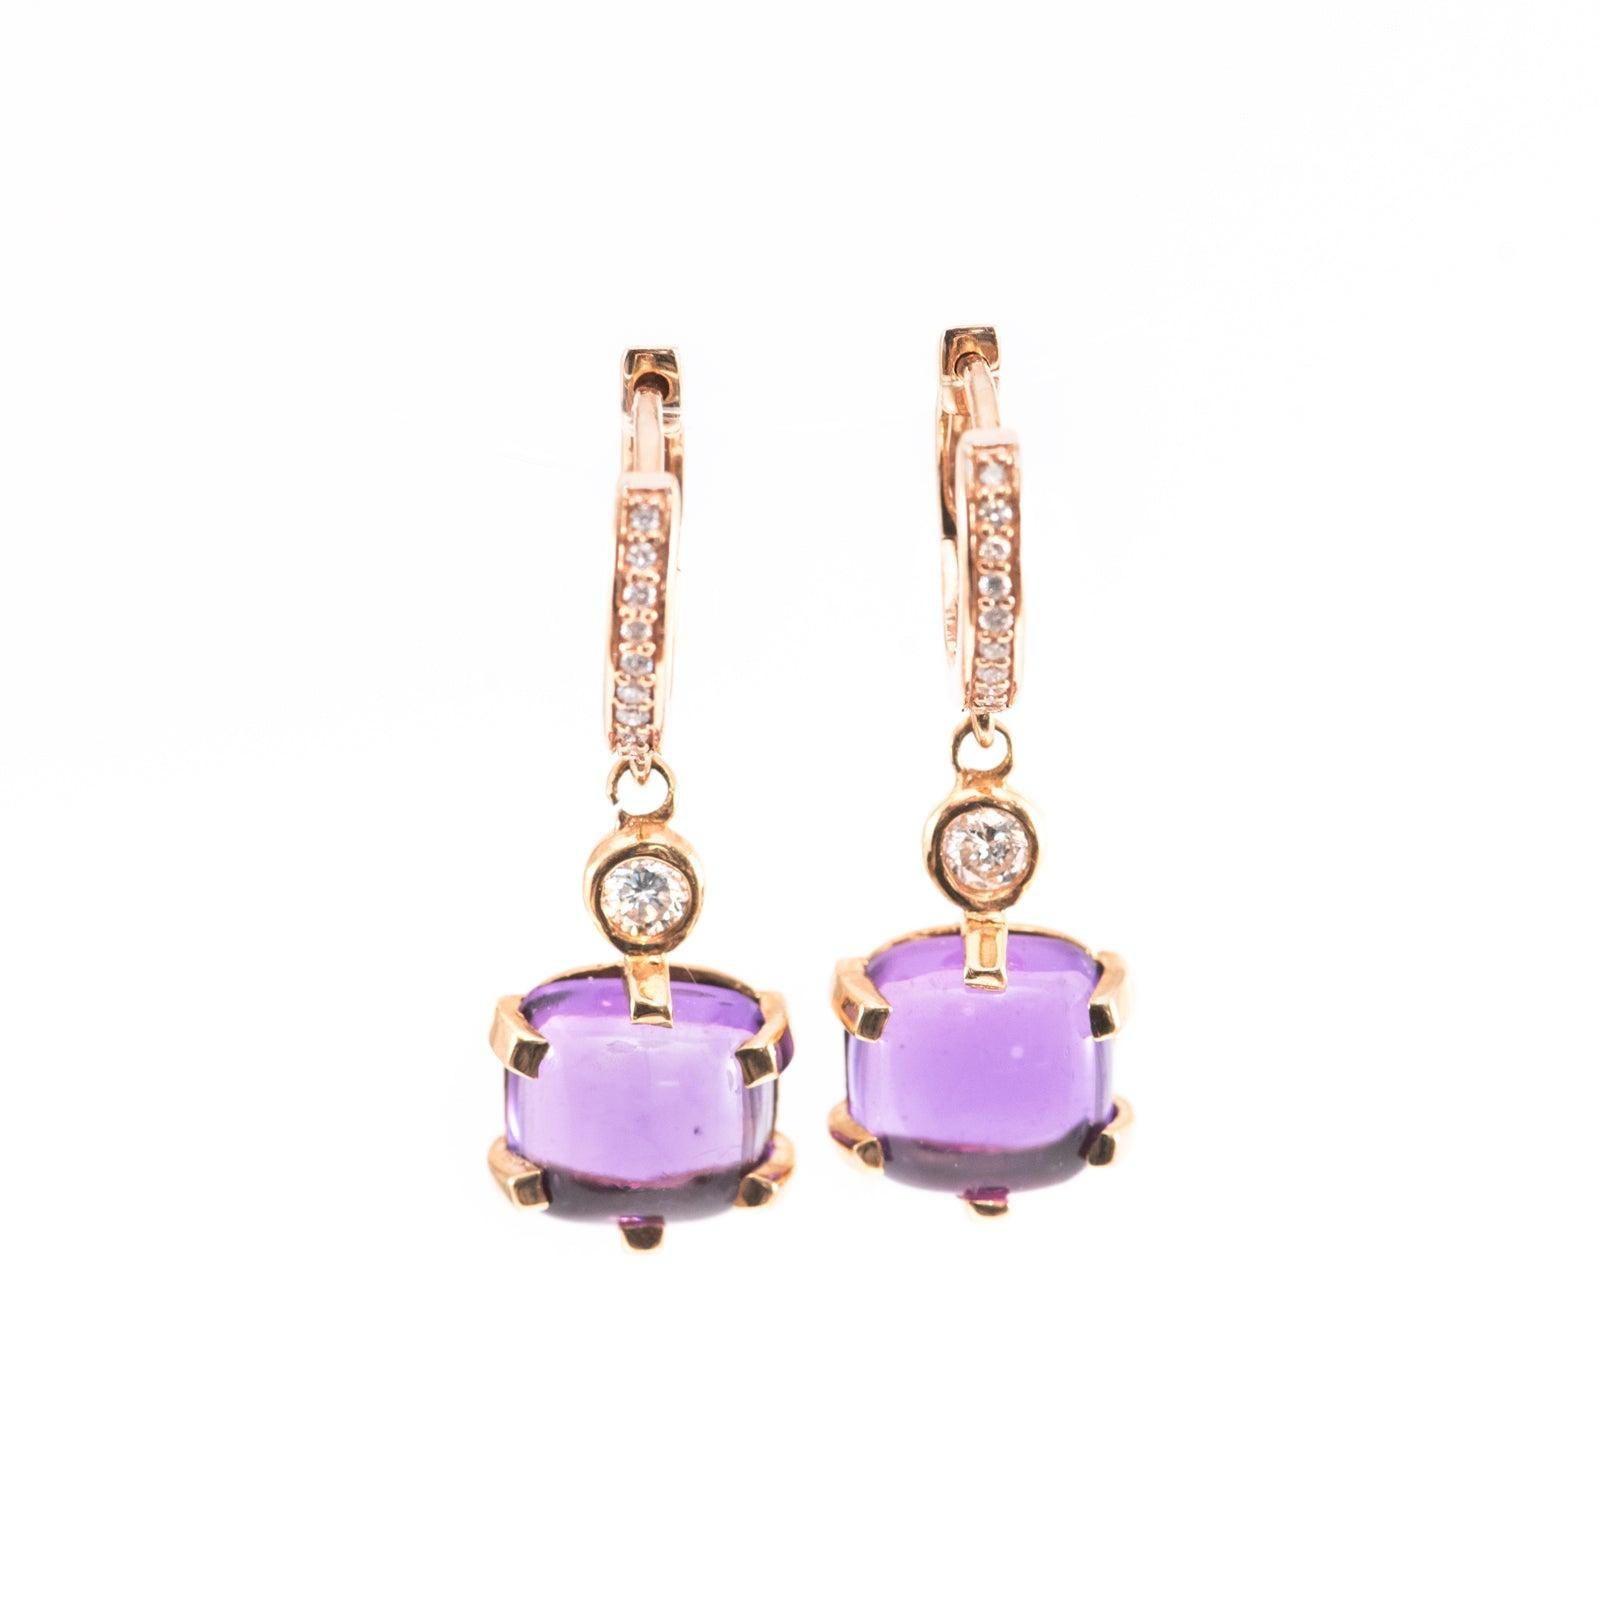 An amazing pair of cabochon amethyst earrings that goes with any outfit! 

Set in a 6 Prong head with a bezel round diamond attached all in 18K Rose Gold, these earrings will have you feeling beautiful!
